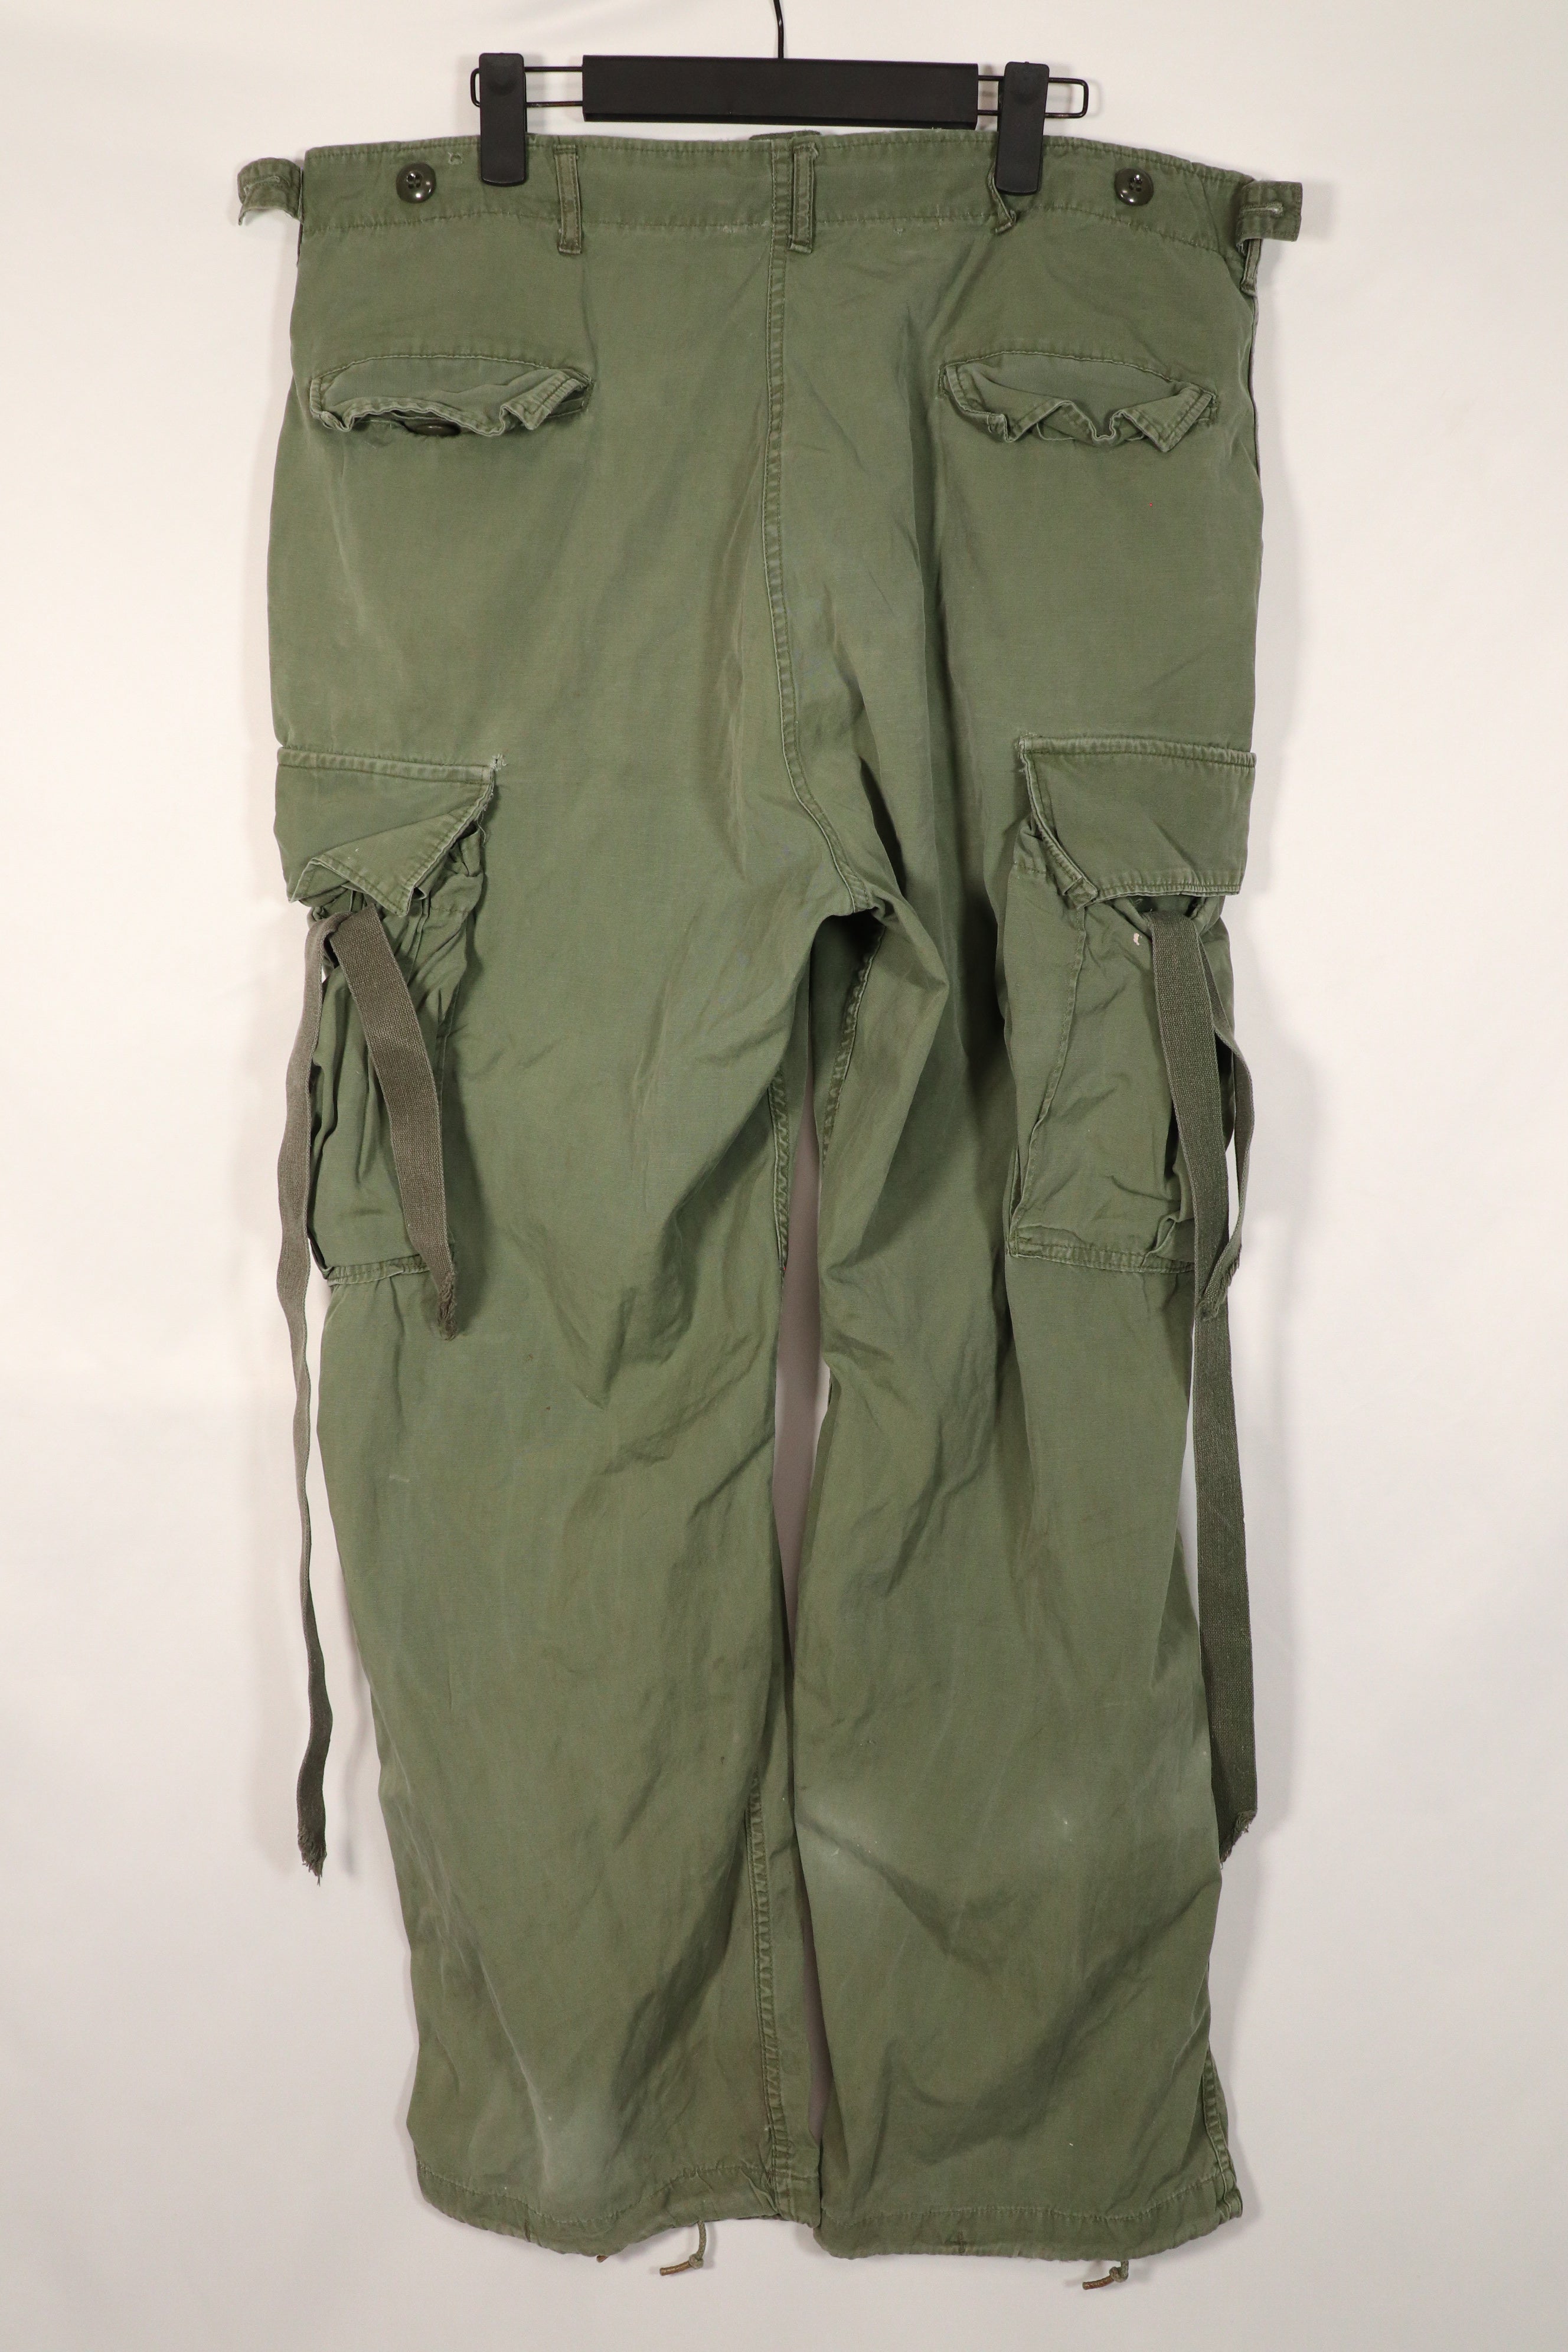 Real 2nd Model Jungle Fatigue Pants with leg ties, large size, stained, used.